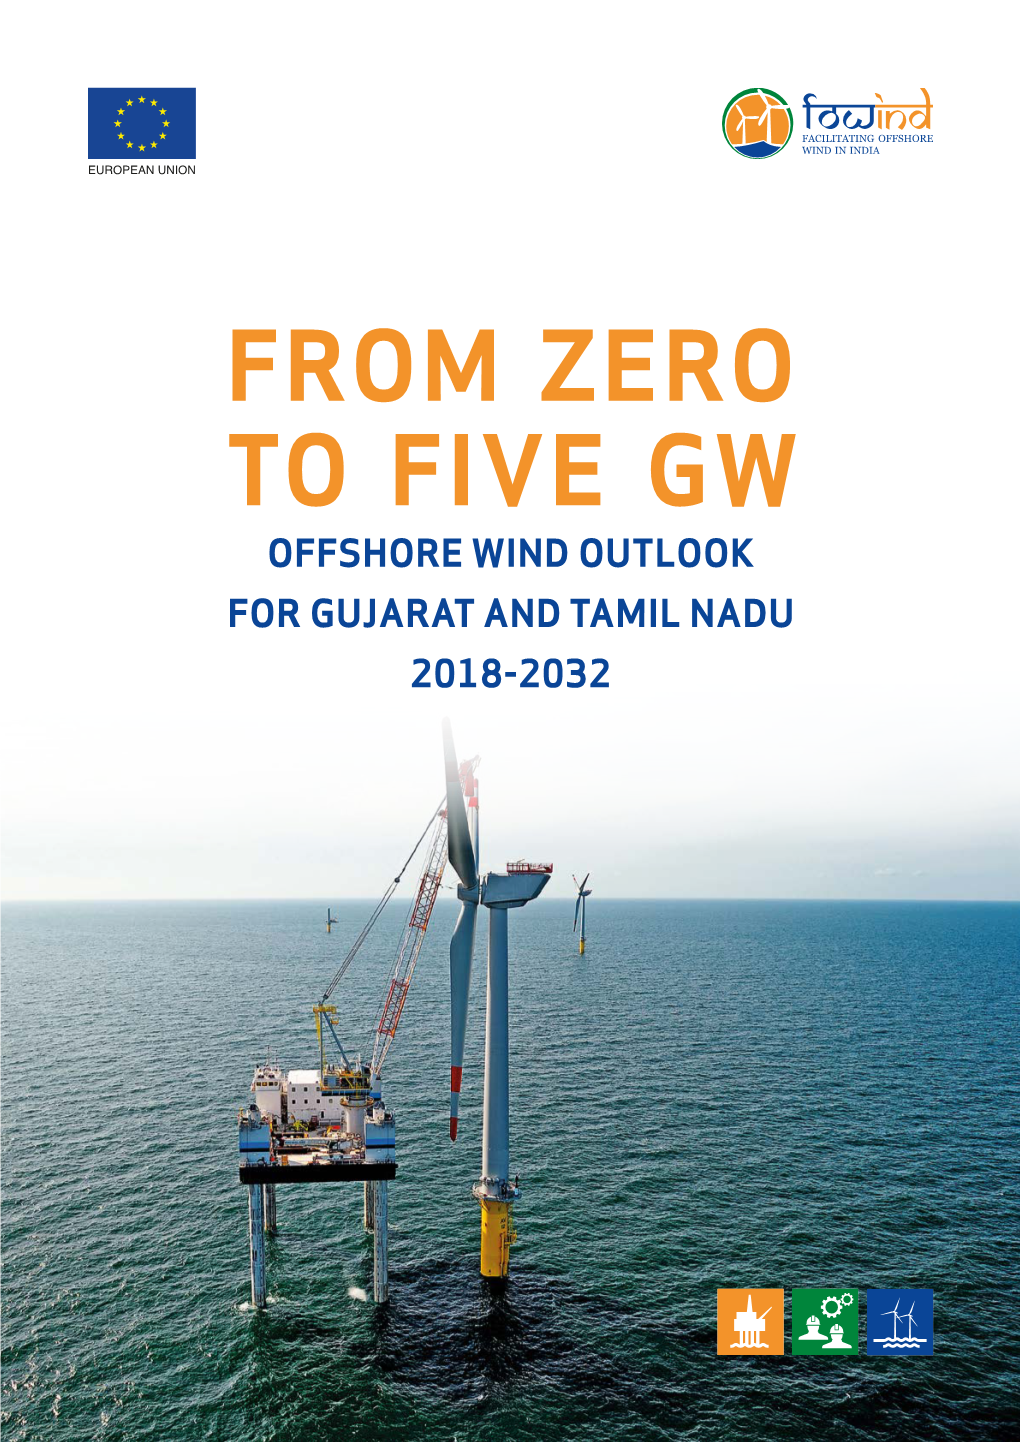 From Zero to Five GW: Offshore Wind Outlook for Gujarat and Tamil Nadu ﻿